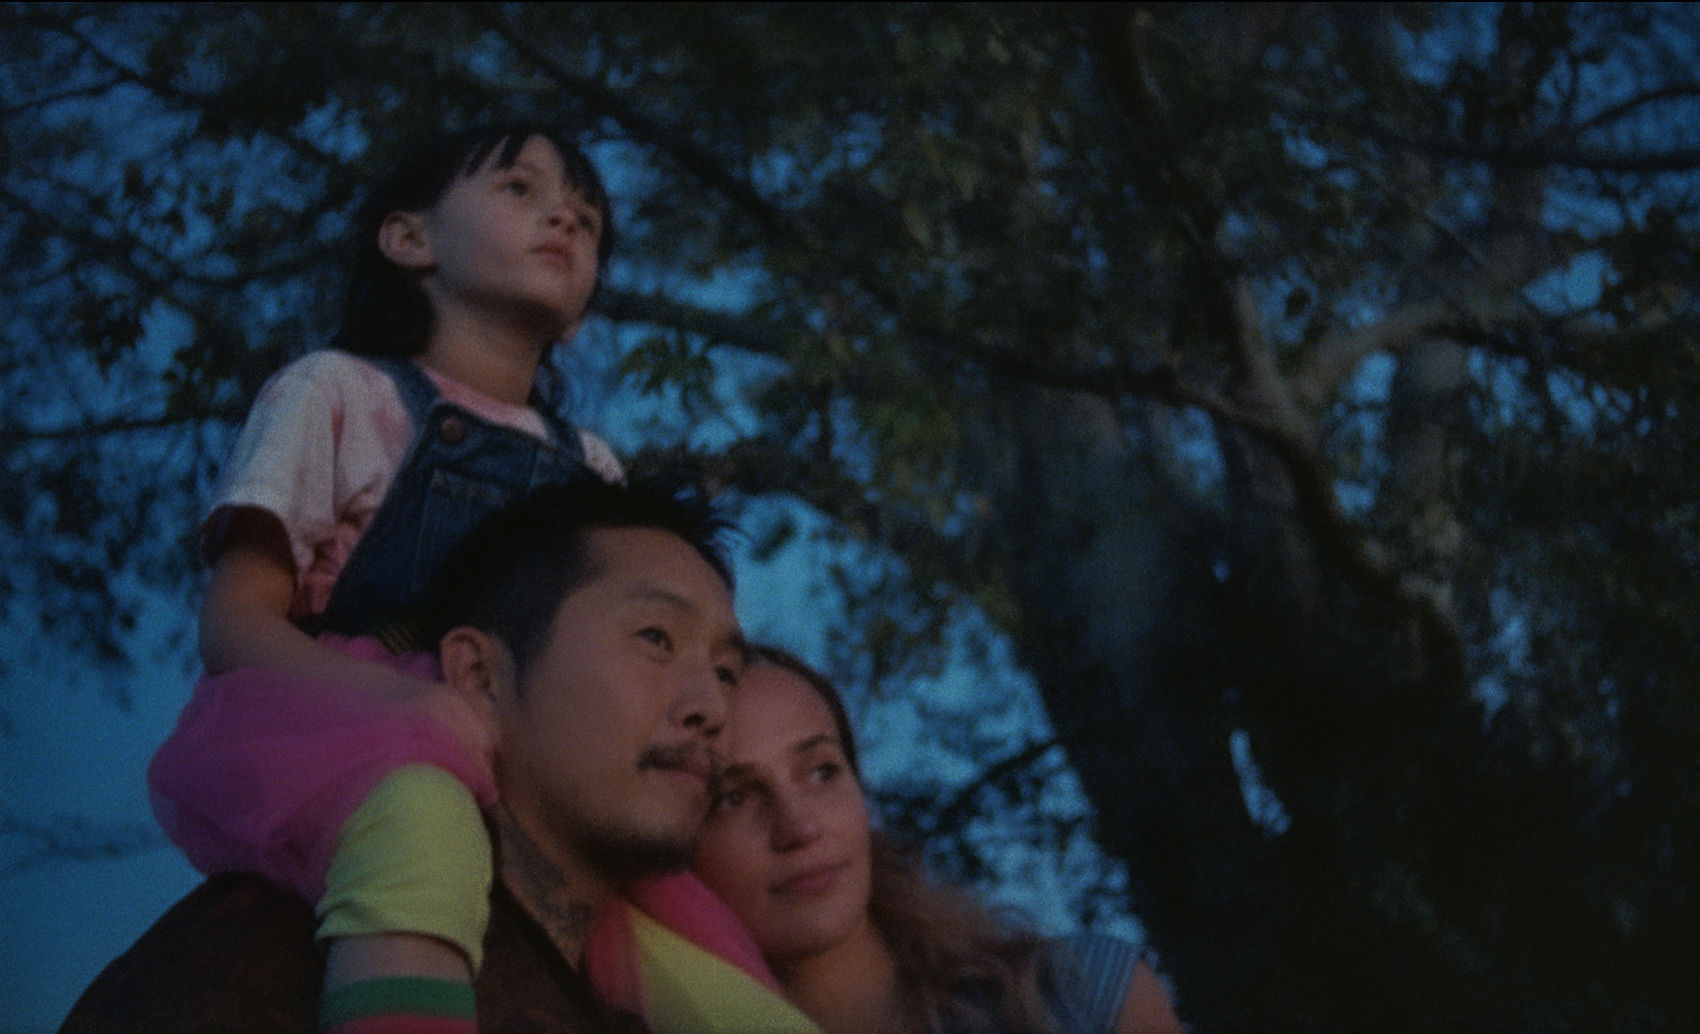 Justin Chon Talks About Deportation After Youth Adoption In Blue Bayou [Exclusive Interview]